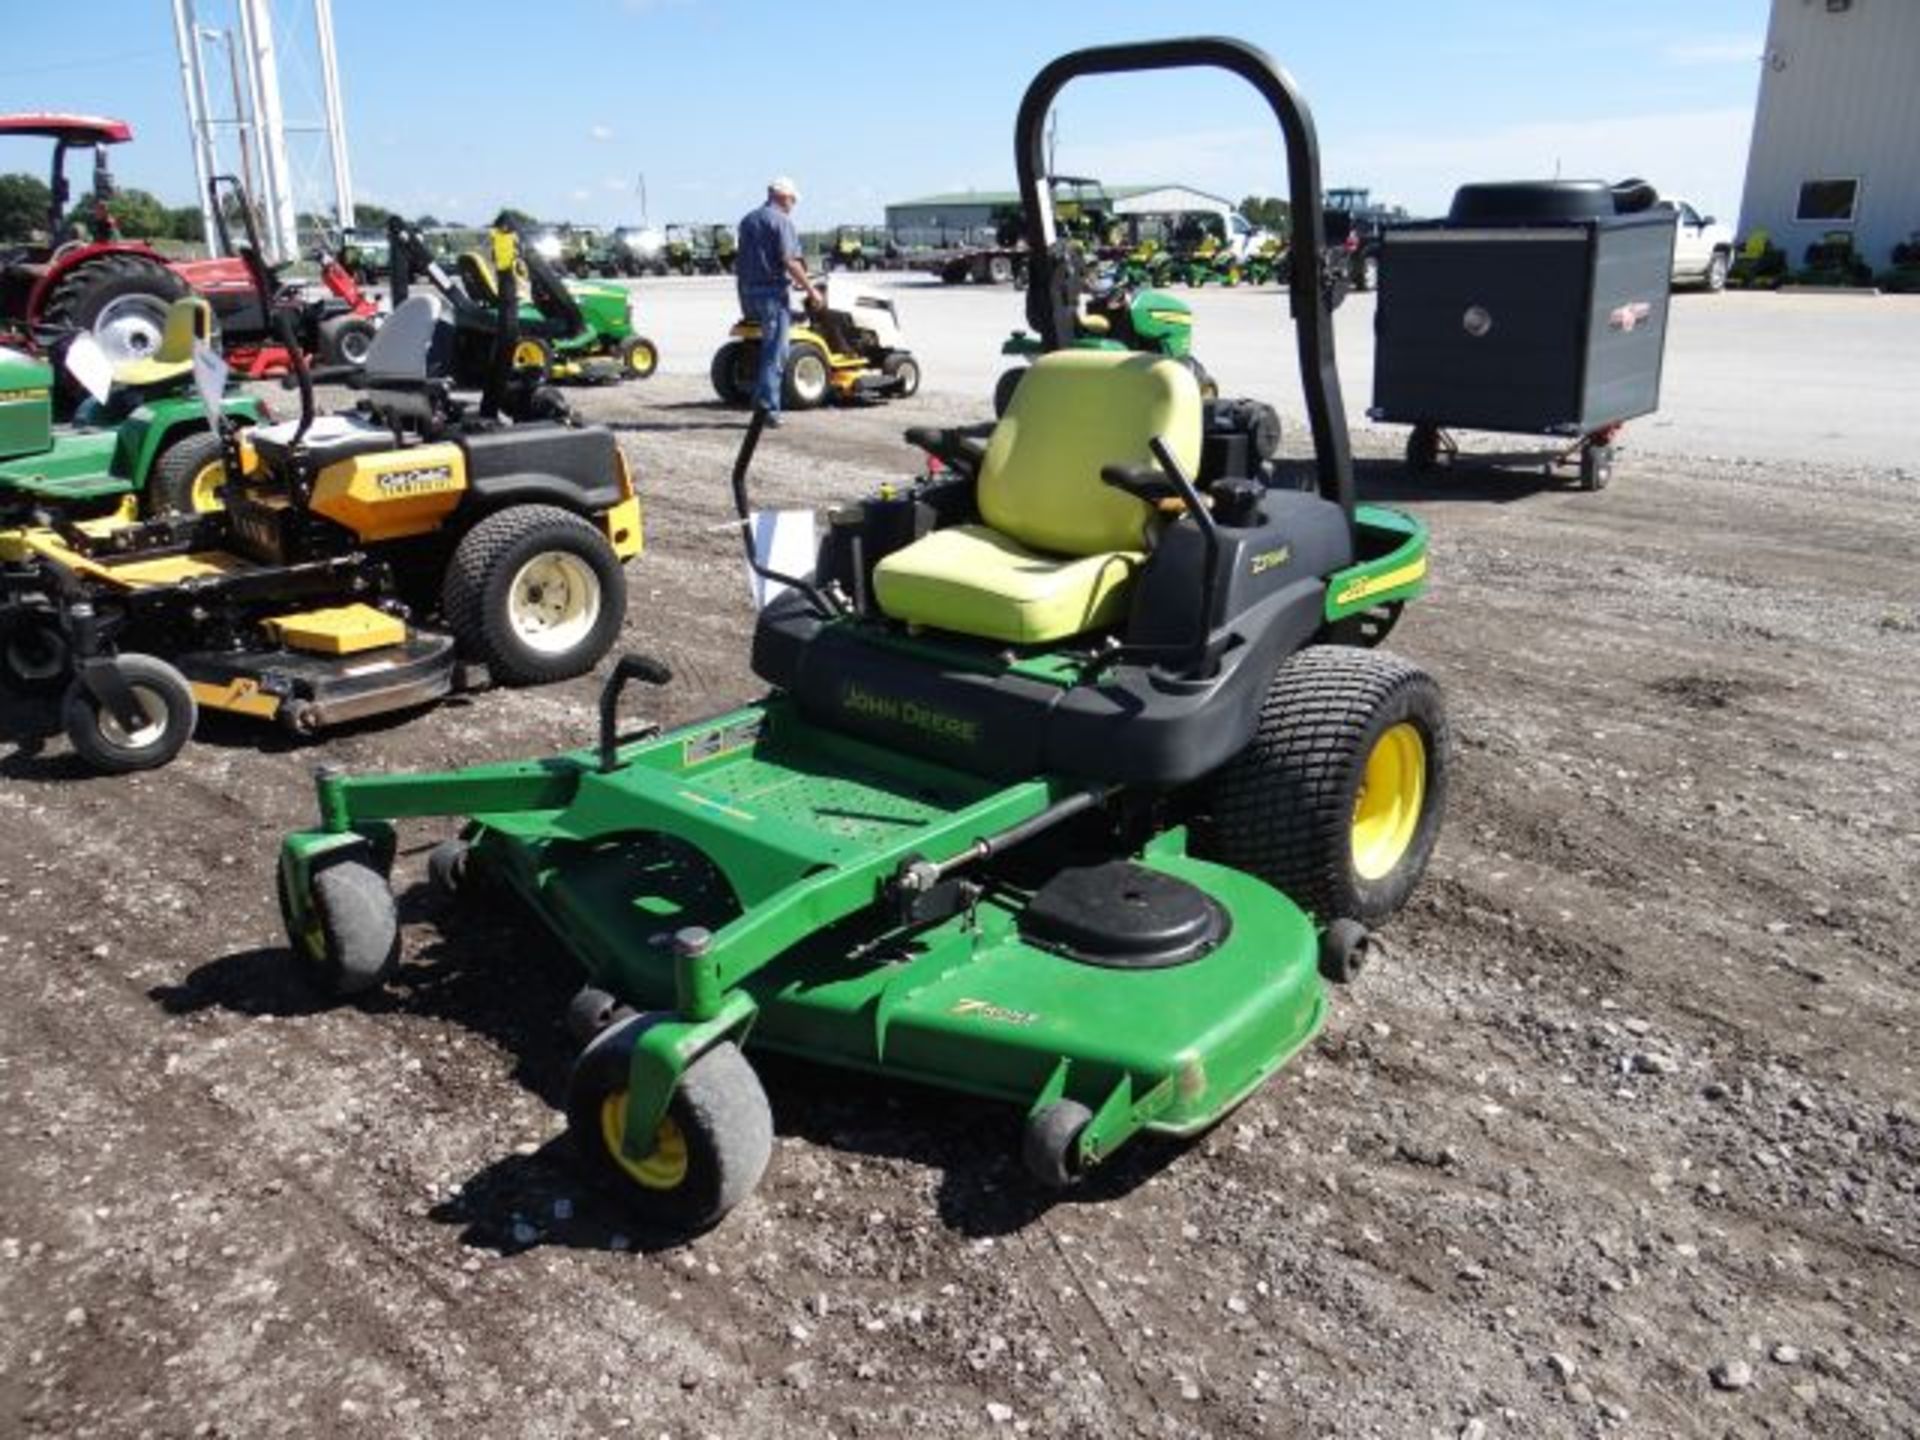 Lot 50261 - 2007 JD 797/72 Mid Z Pro Mower 2013 hrs, 29hp, Kawasaki, Water Cool, Fuel Injection, 72" - Image 2 of 4